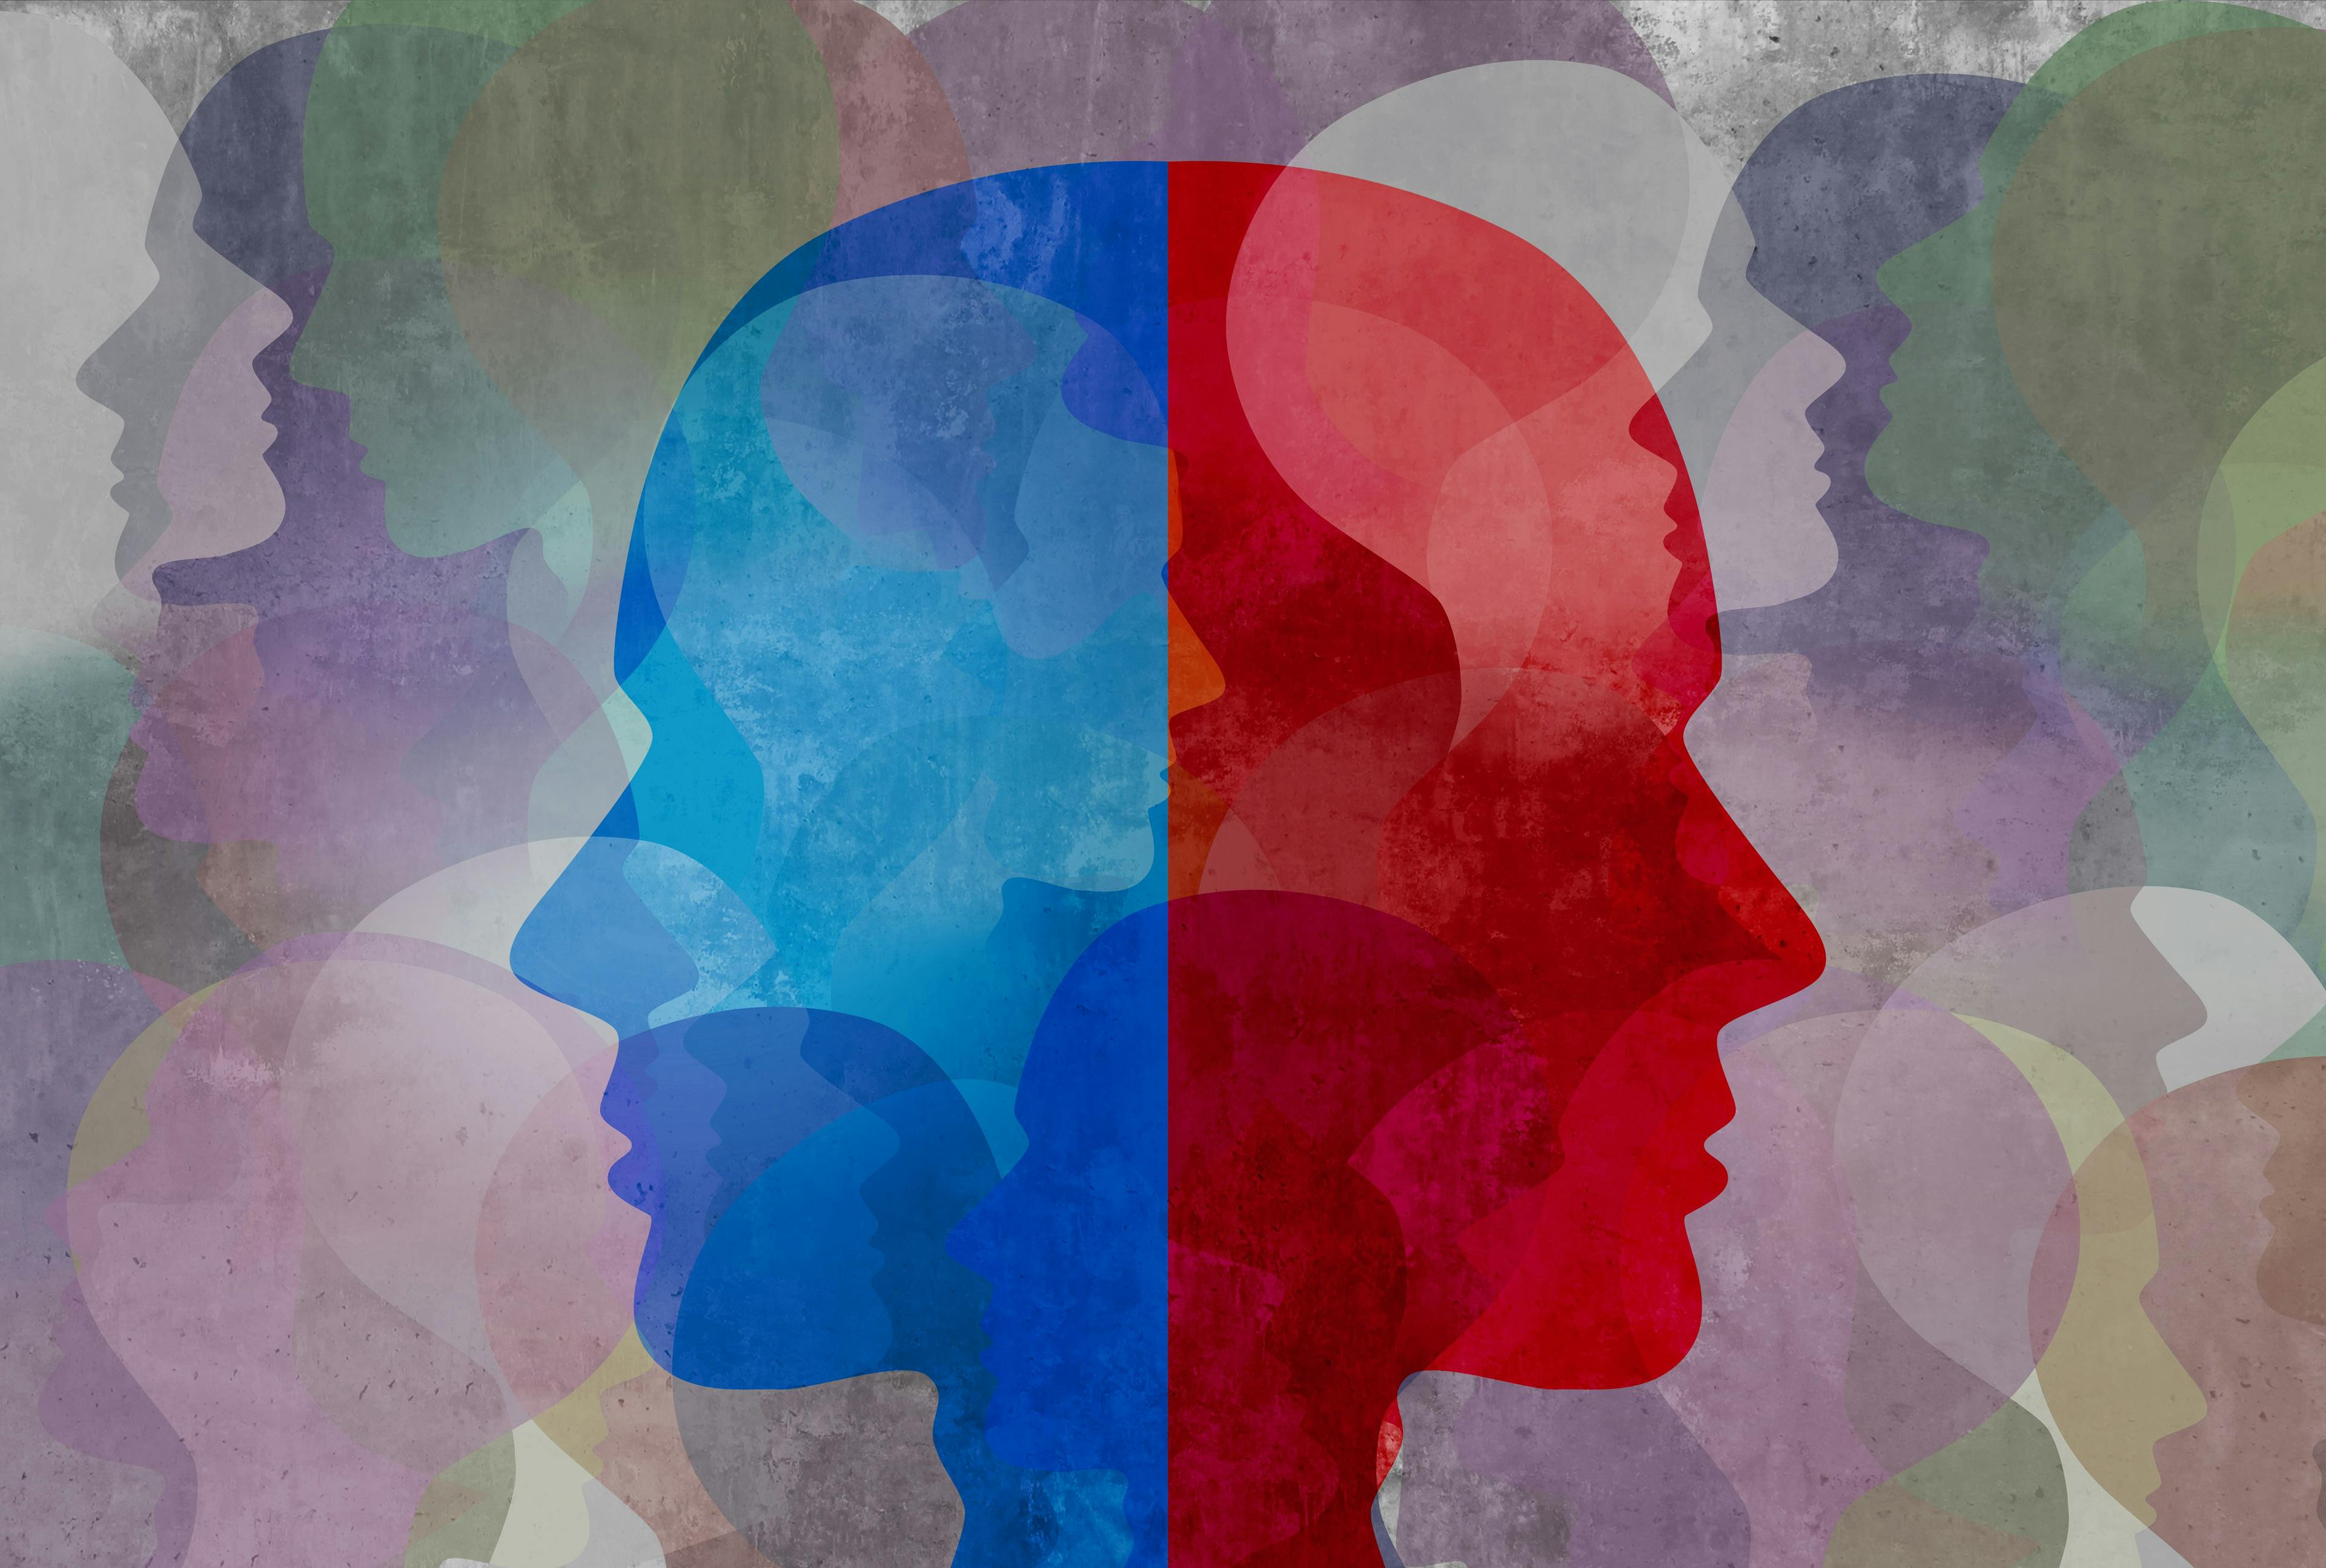 a blue silhouette of a head facing left and a red silhouette of a head facing right